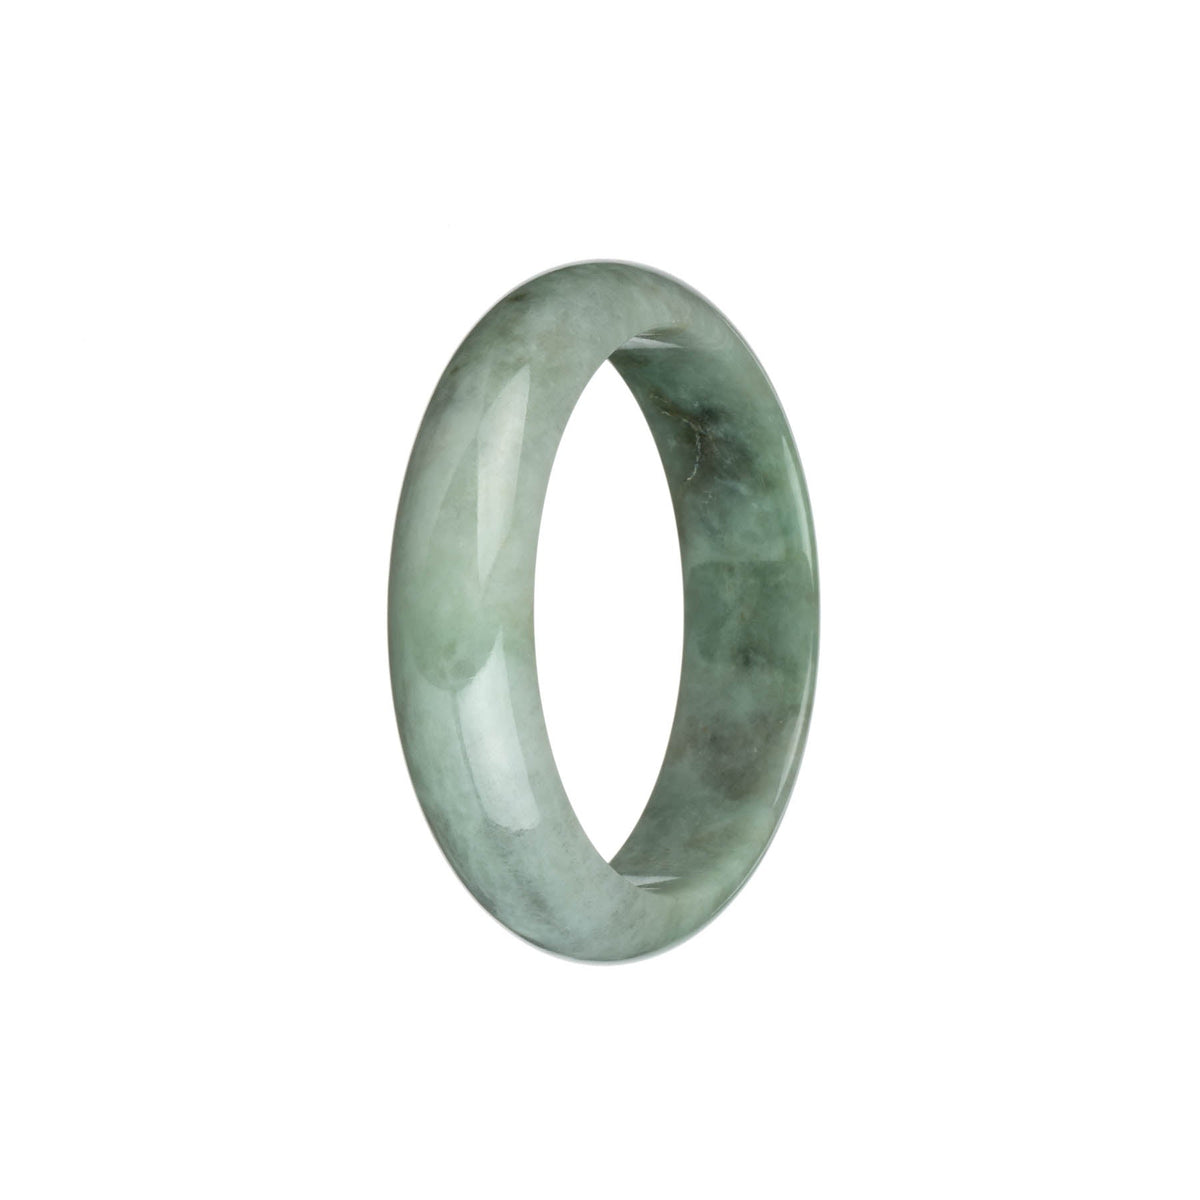 A half-moon shaped jadeite jade bangle bracelet with green and light grey hues and a brown patch, measuring 53mm. Handcrafted by MAYS.